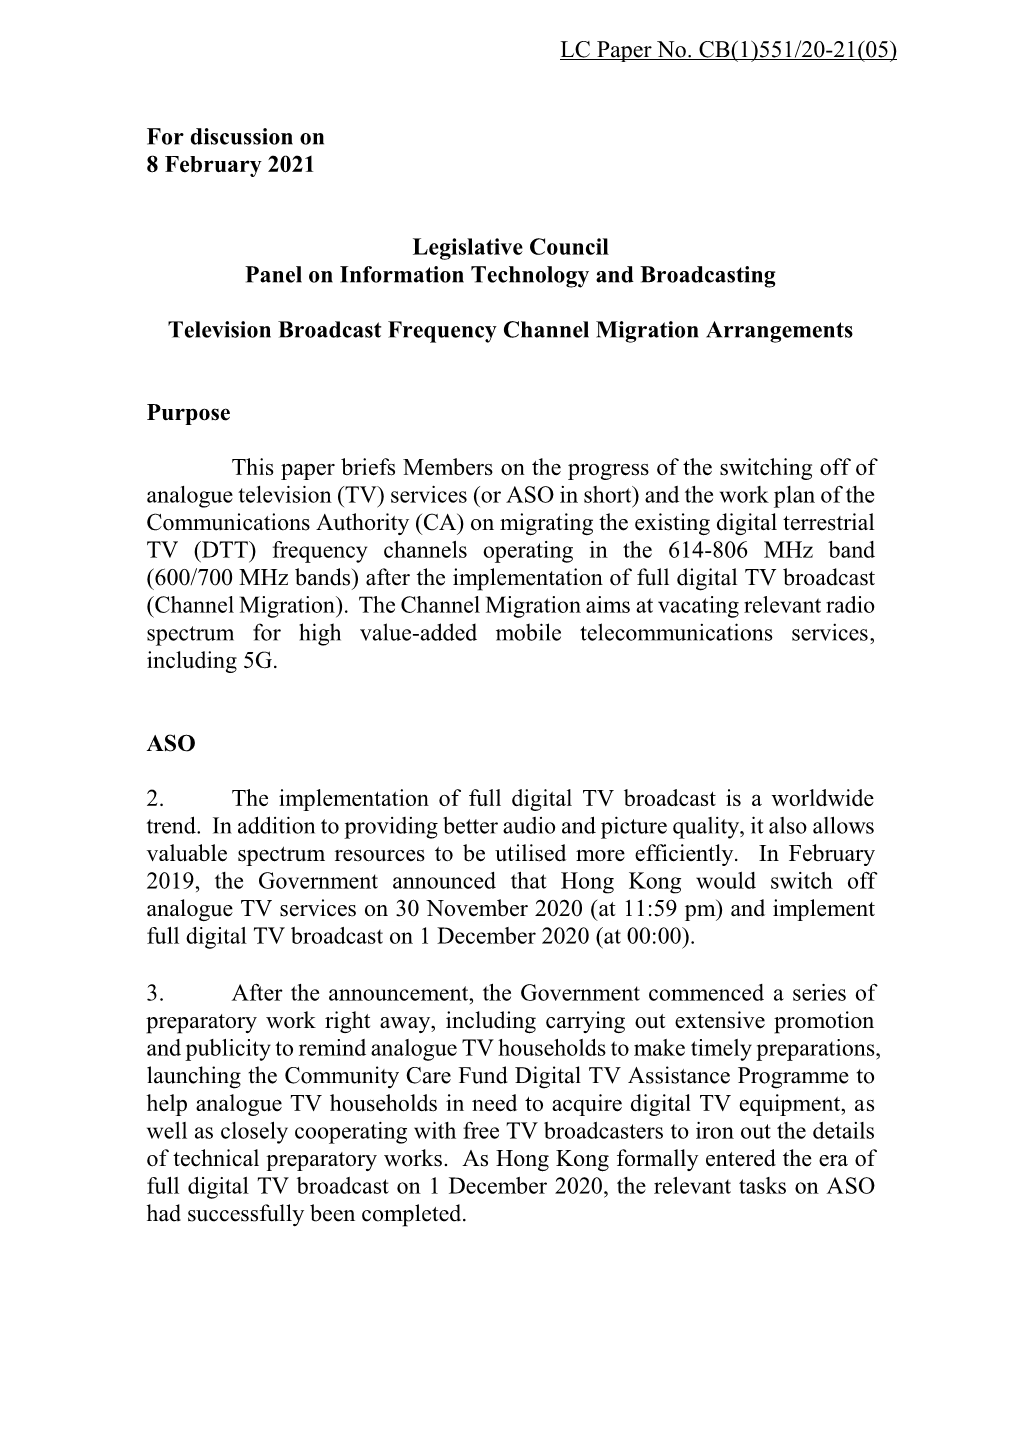 Administration's Paper on Television Broadcast Frequency Channel Migration Arrangements